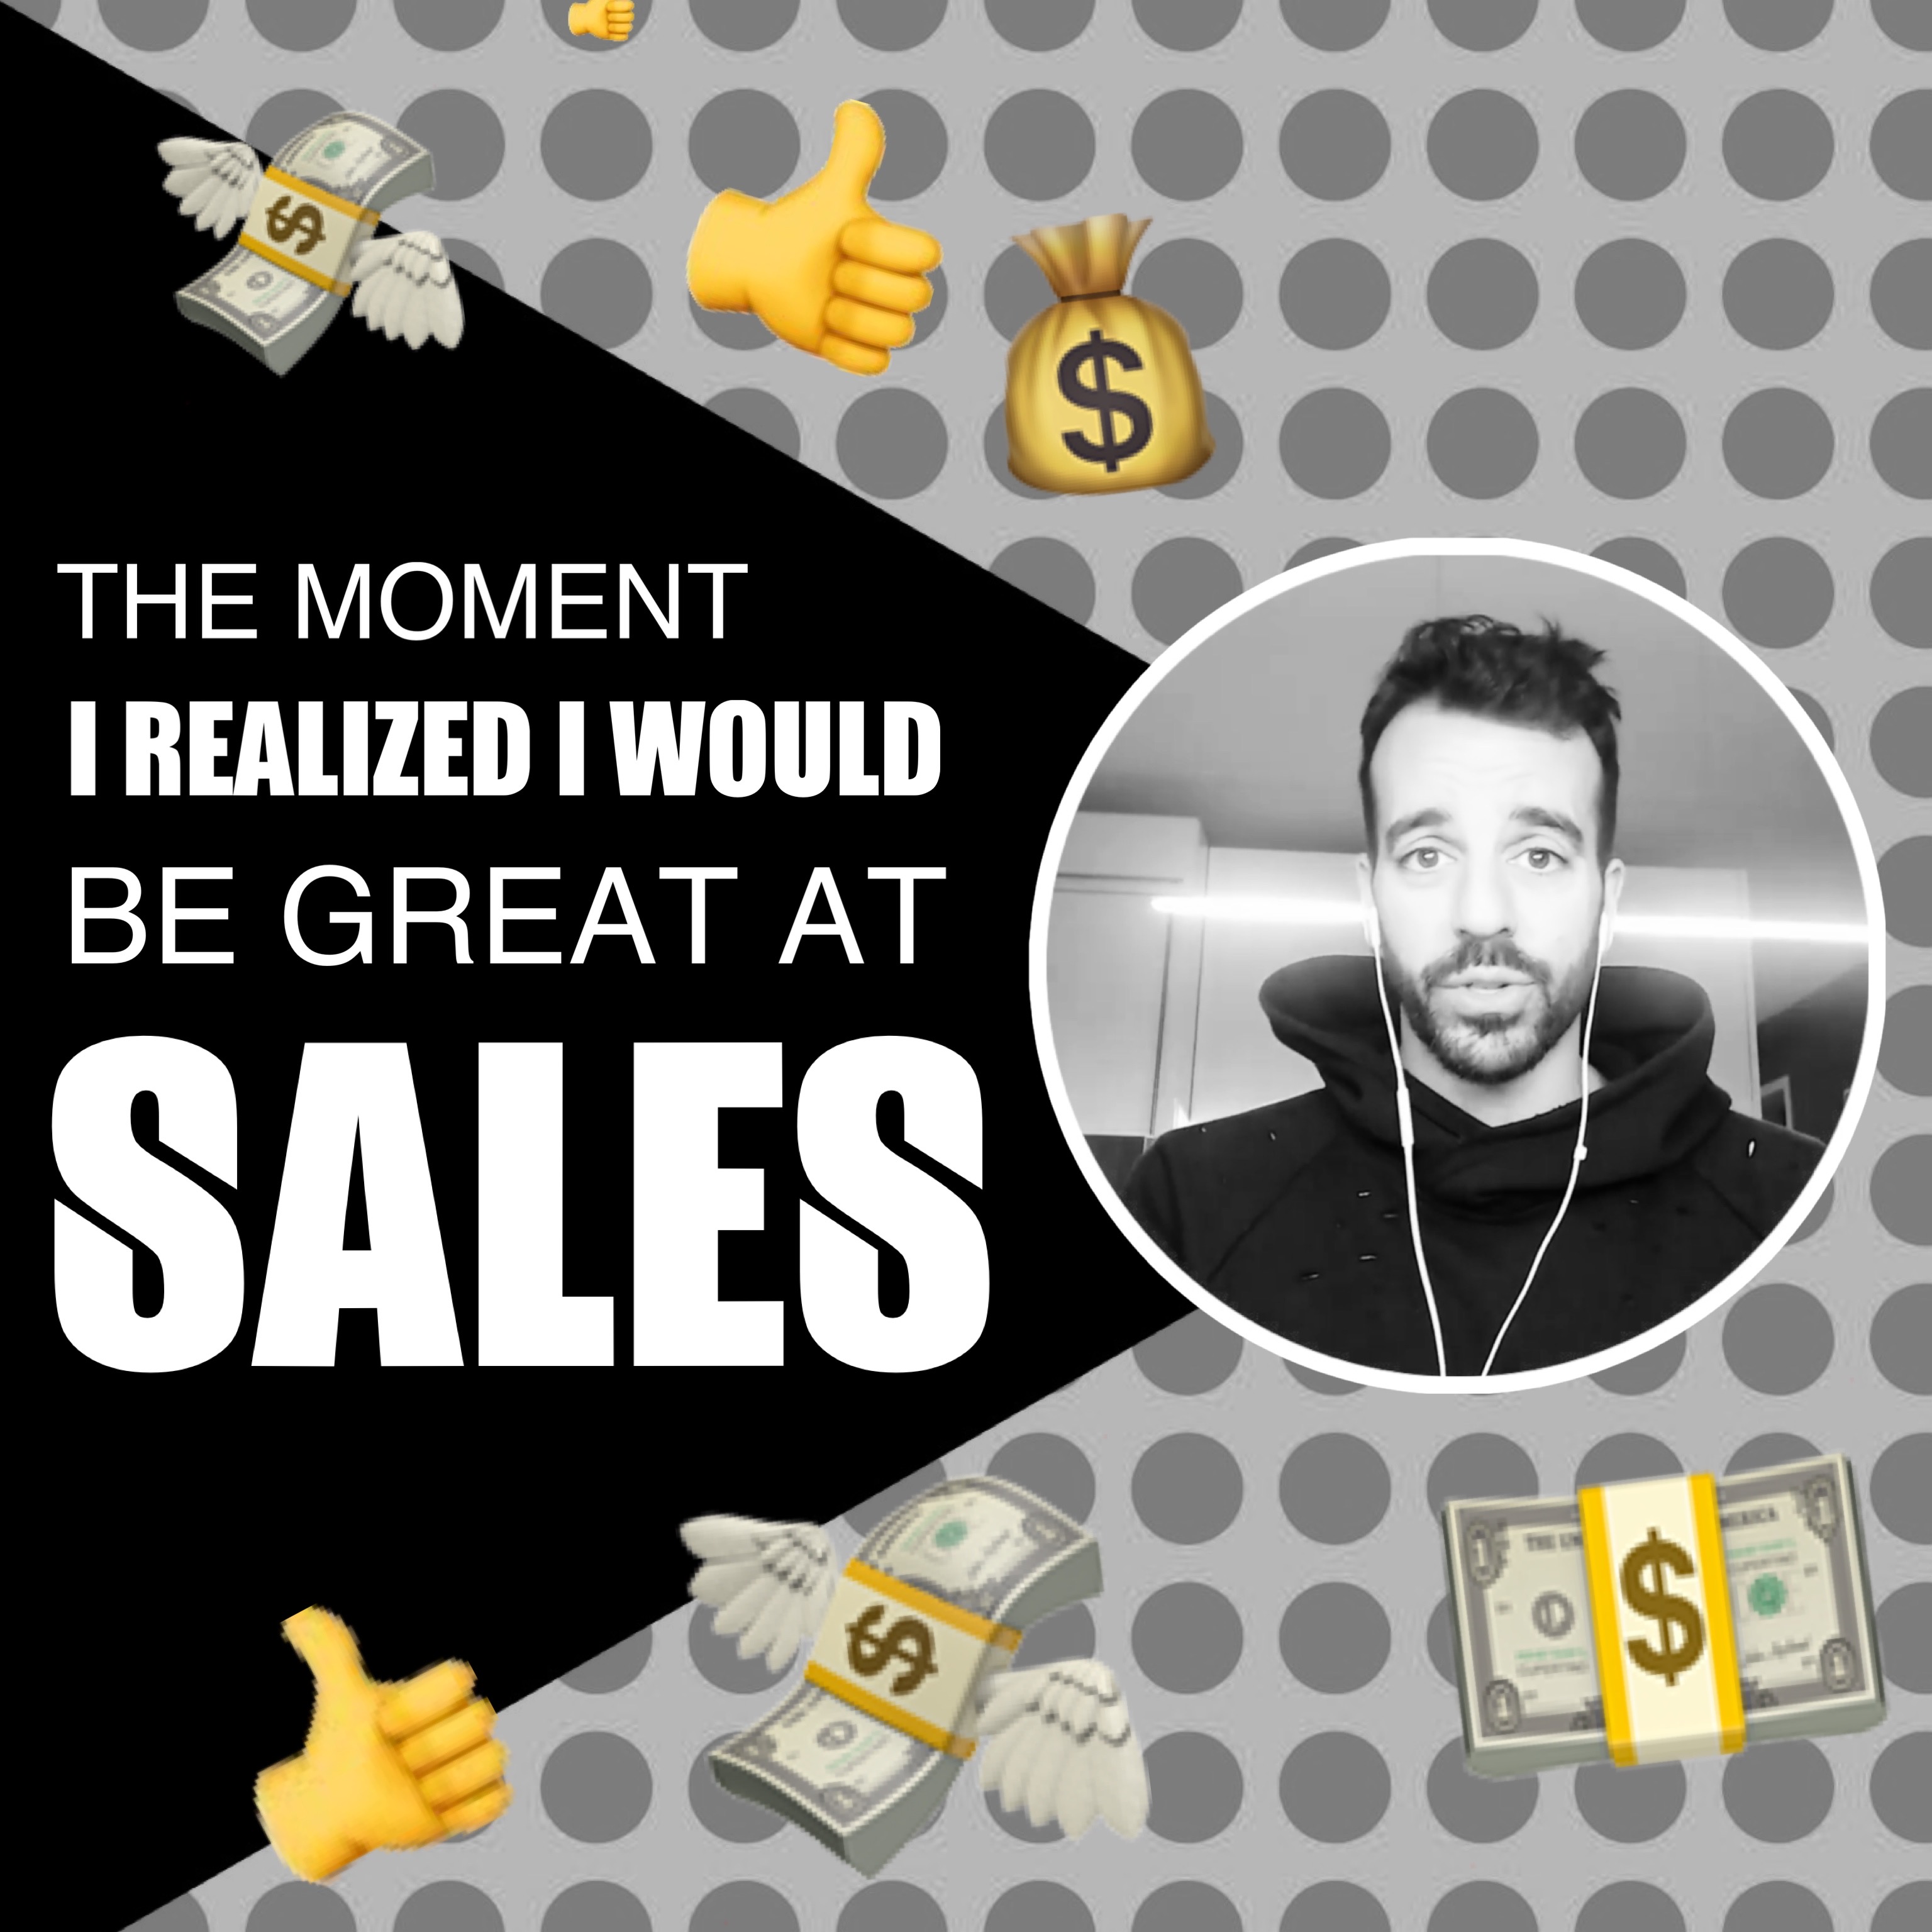 023: The moment I realized I would be great at sales